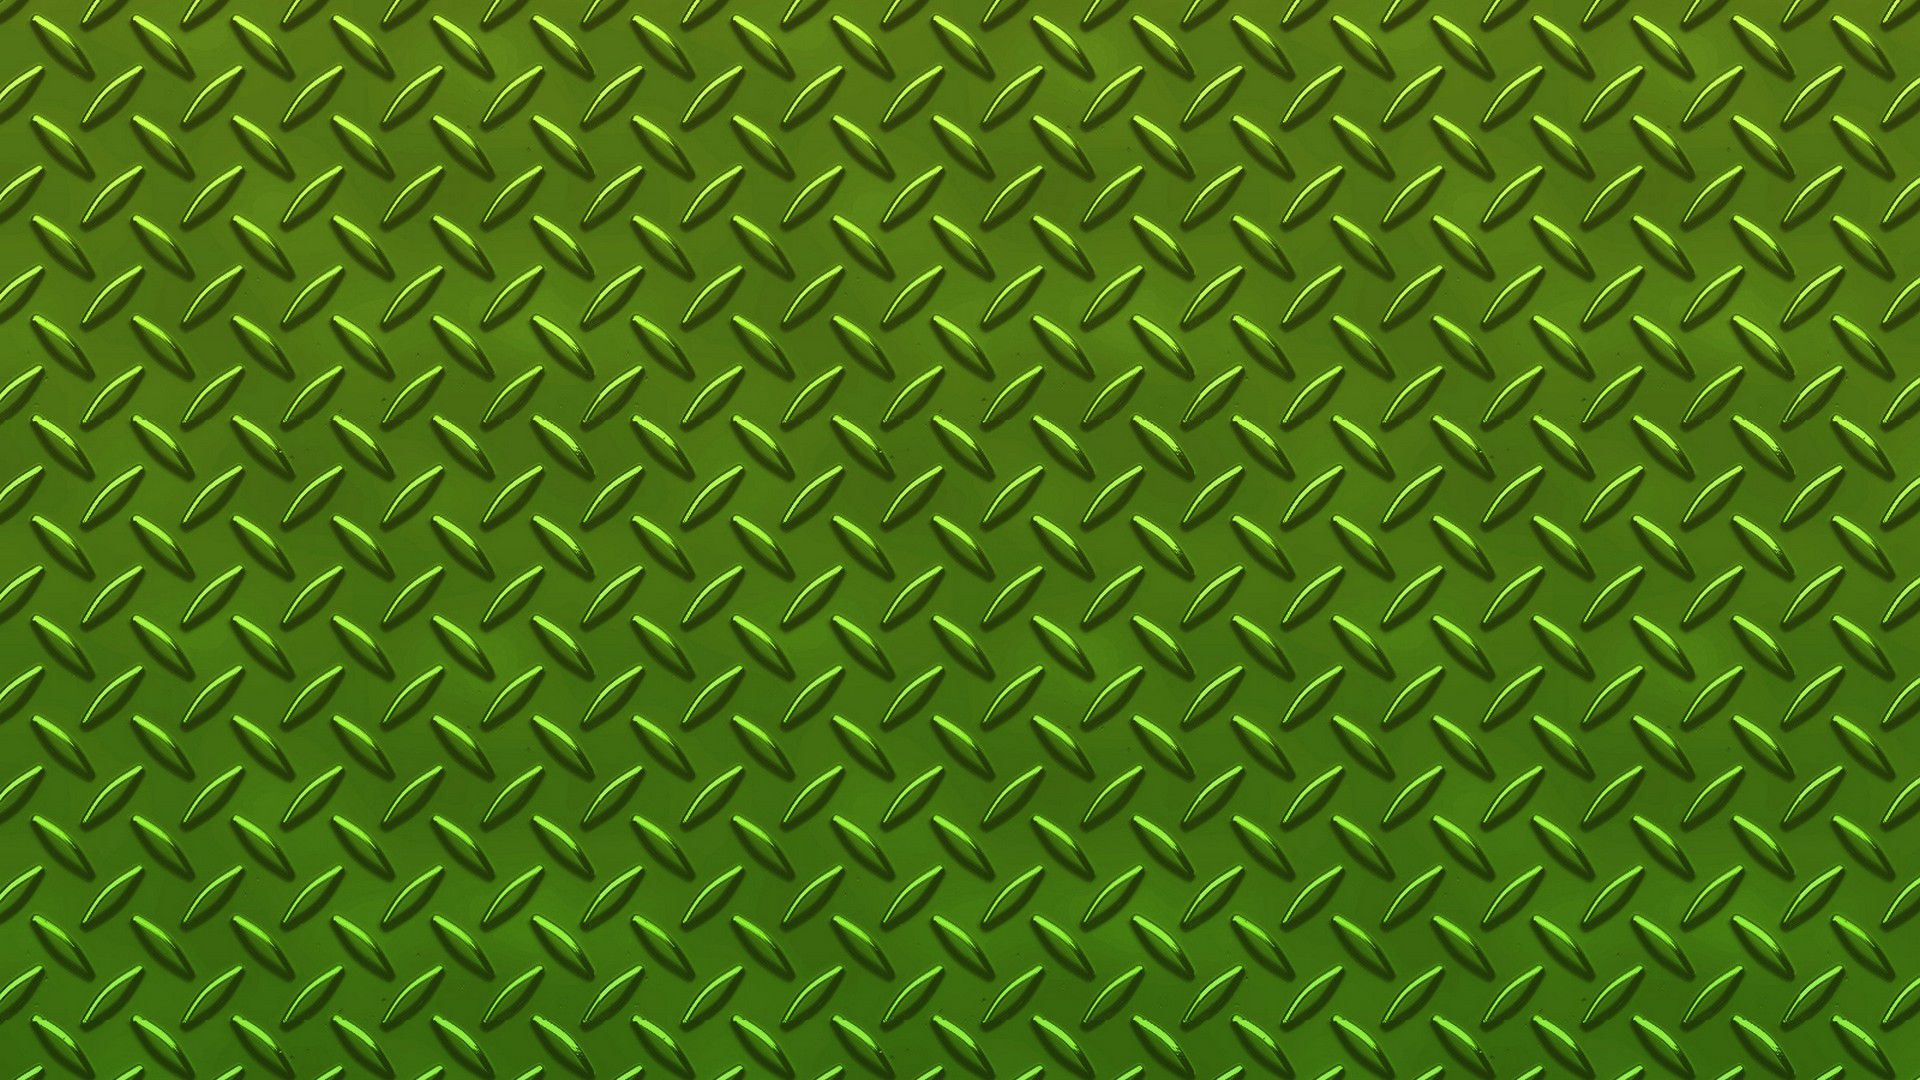 Wallpapers Computer Green with image resolution 1920x1080 pixel. You can make this wallpaper for your Desktop Computer Backgrounds, Mac Wallpapers, Android Lock screen or iPhone Screensavers